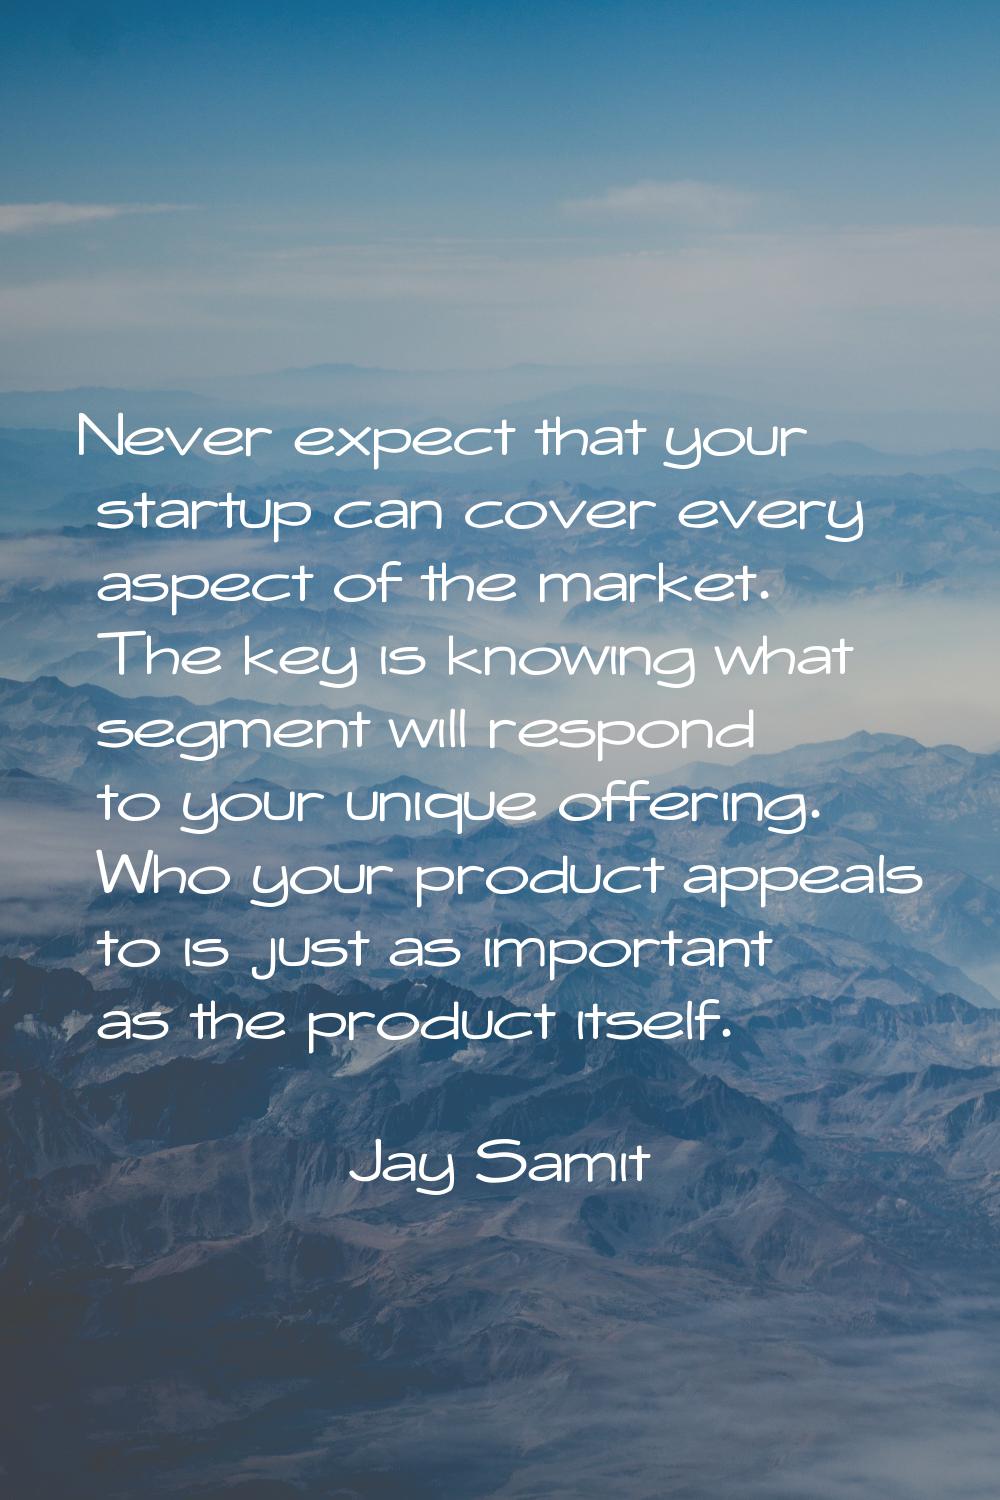 Never expect that your startup can cover every aspect of the market. The key is knowing what segmen